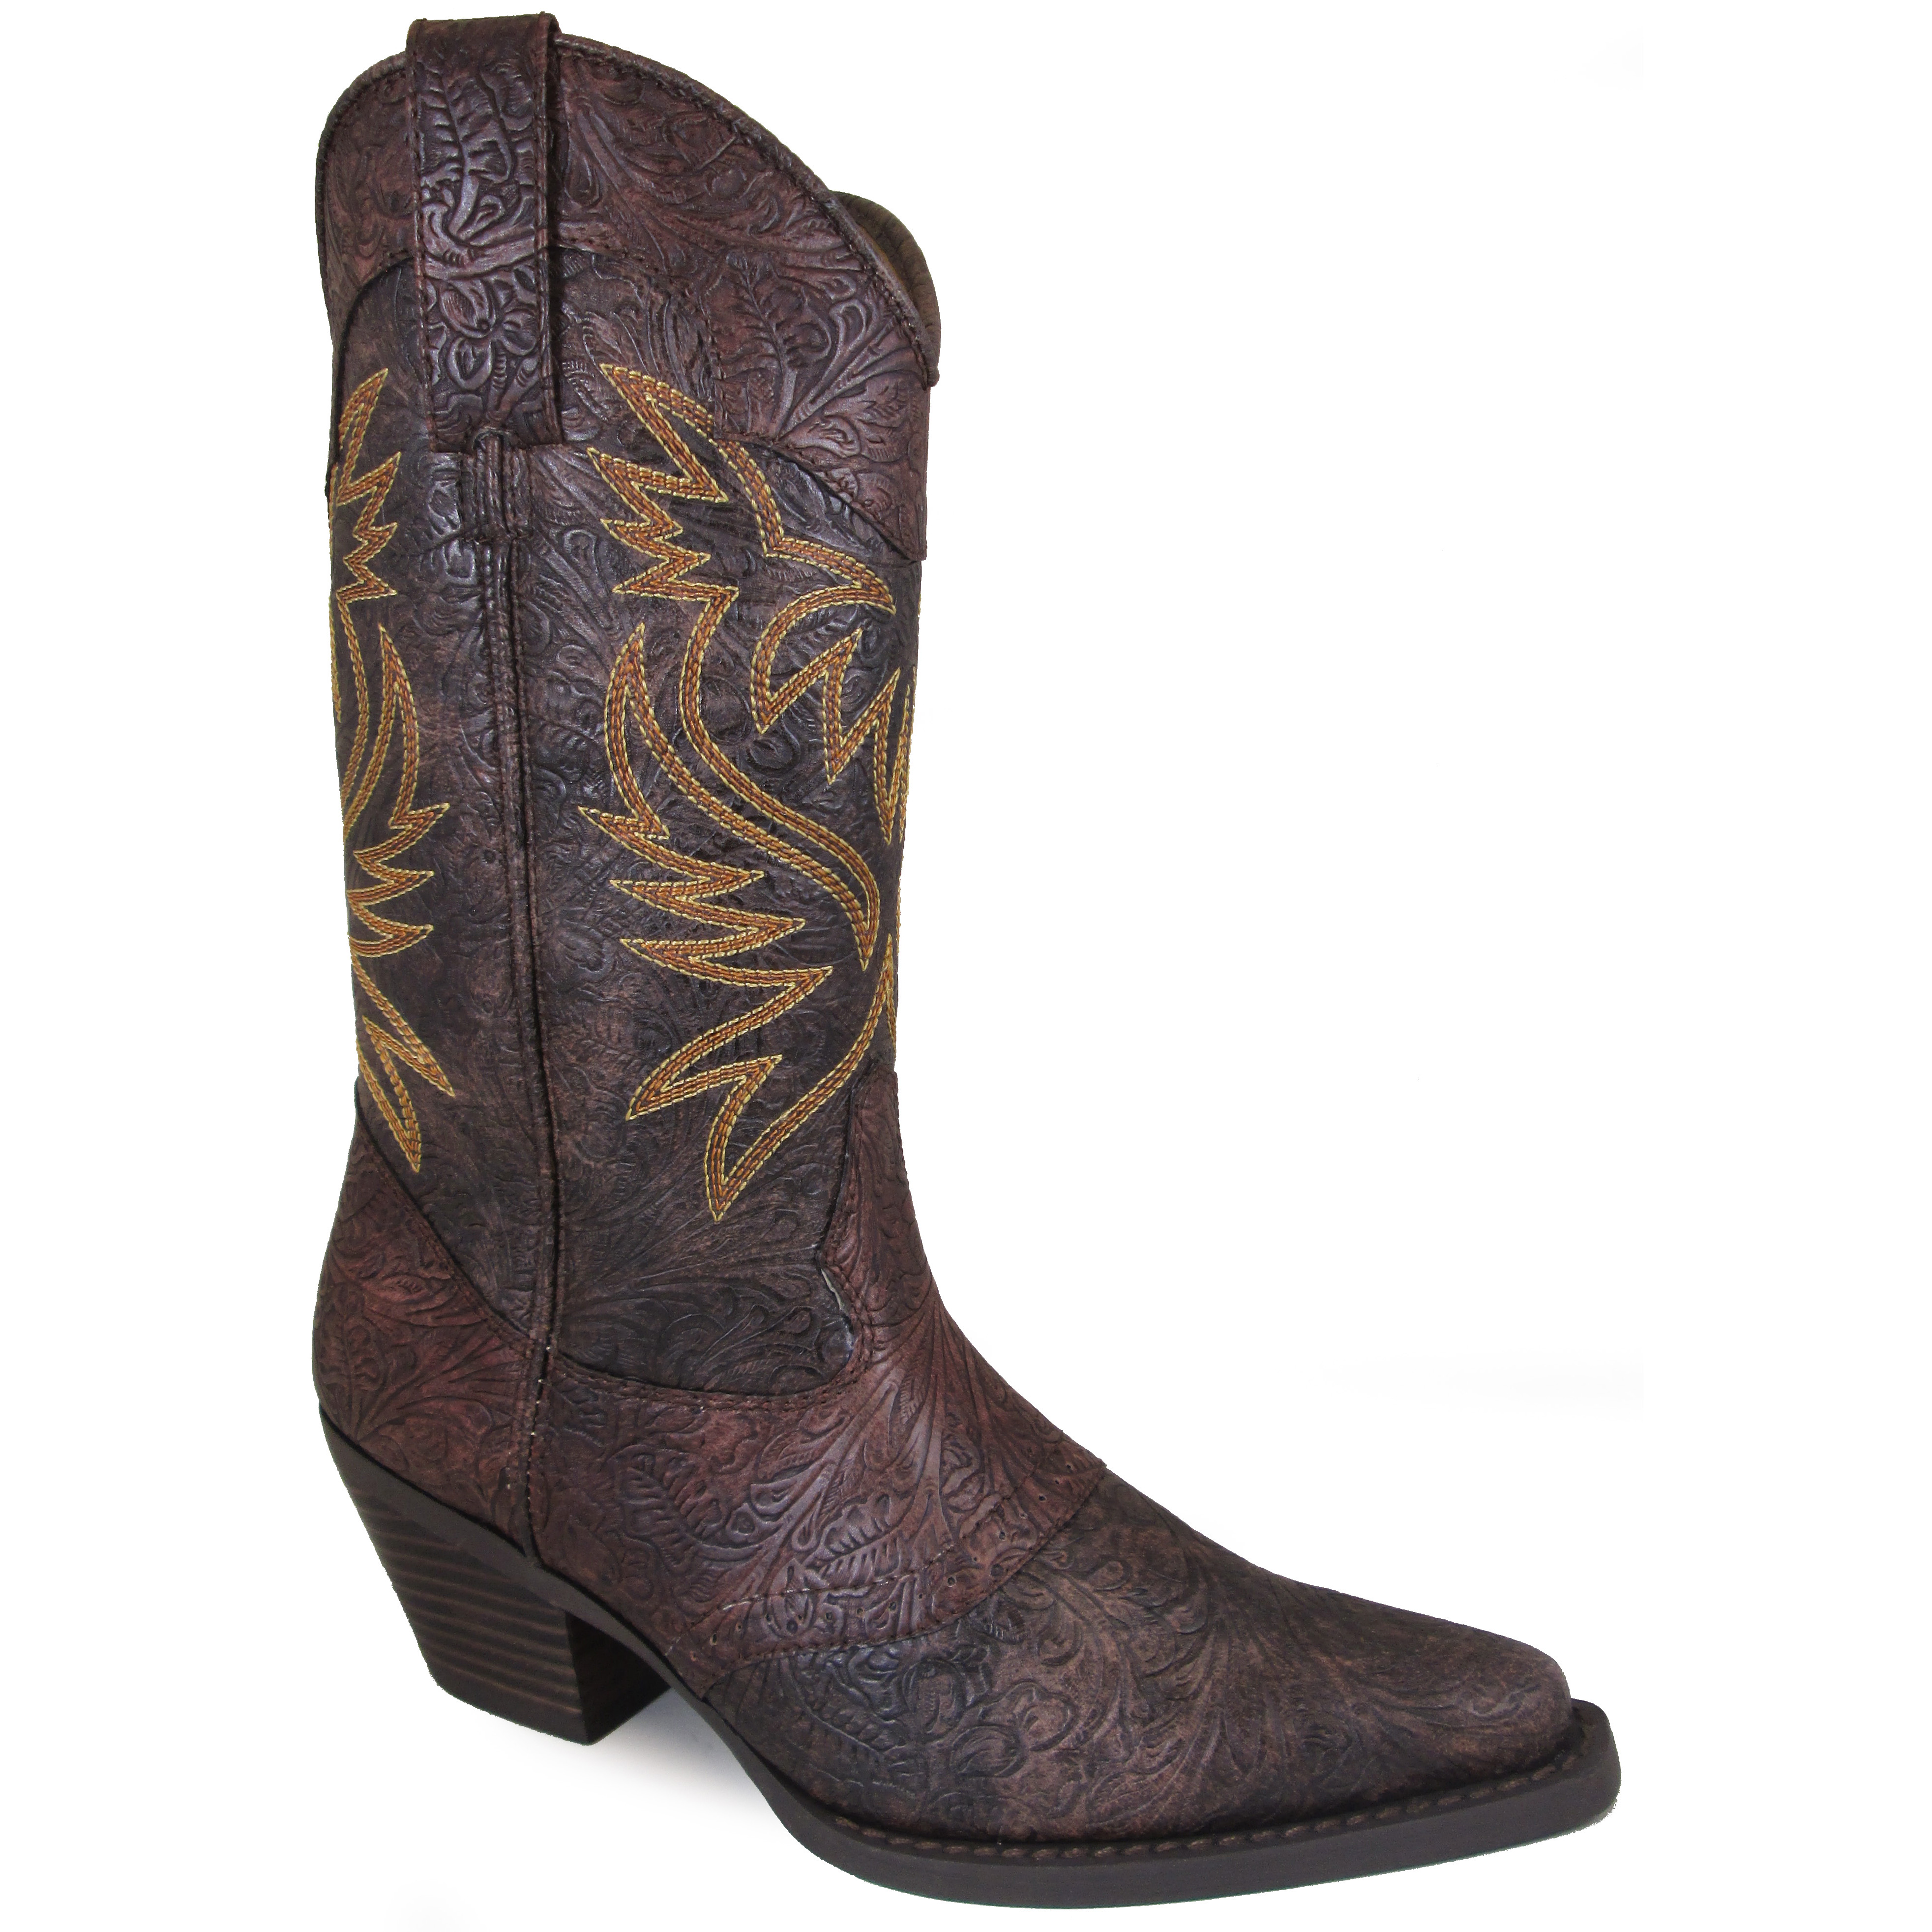 Smoky Mountain Boots Women's Julia 11" Brown Embossed Cowboy Boot